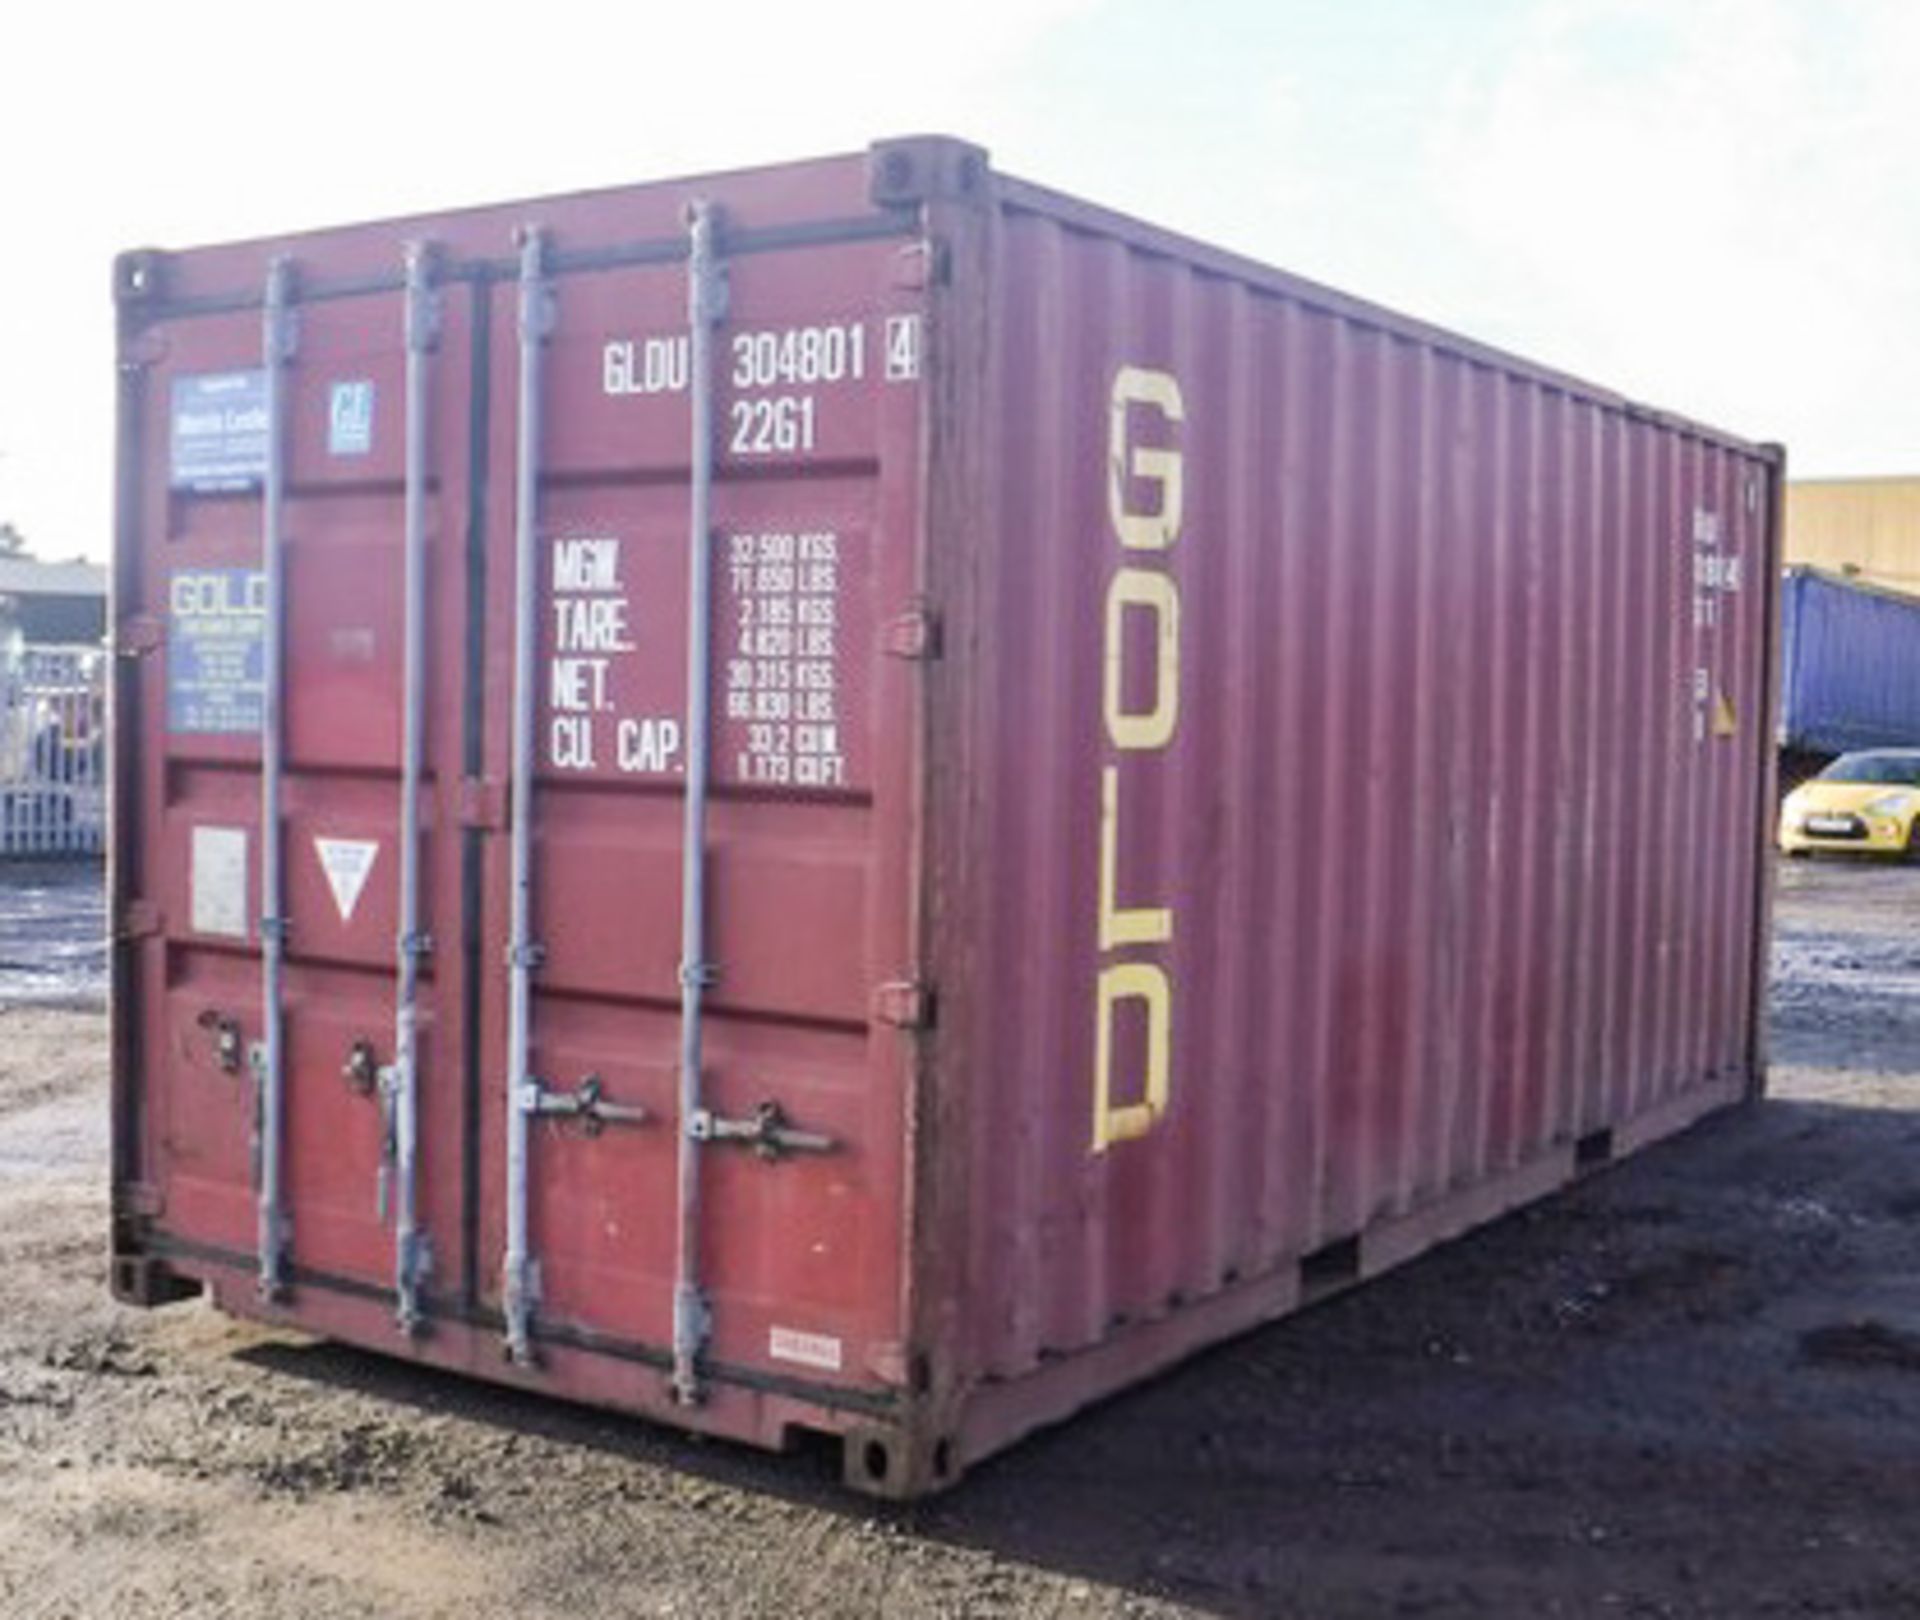 USED 20FT SHIPPING CONTAINER, YEAR MANU - 2003, S/N GLDU3048014